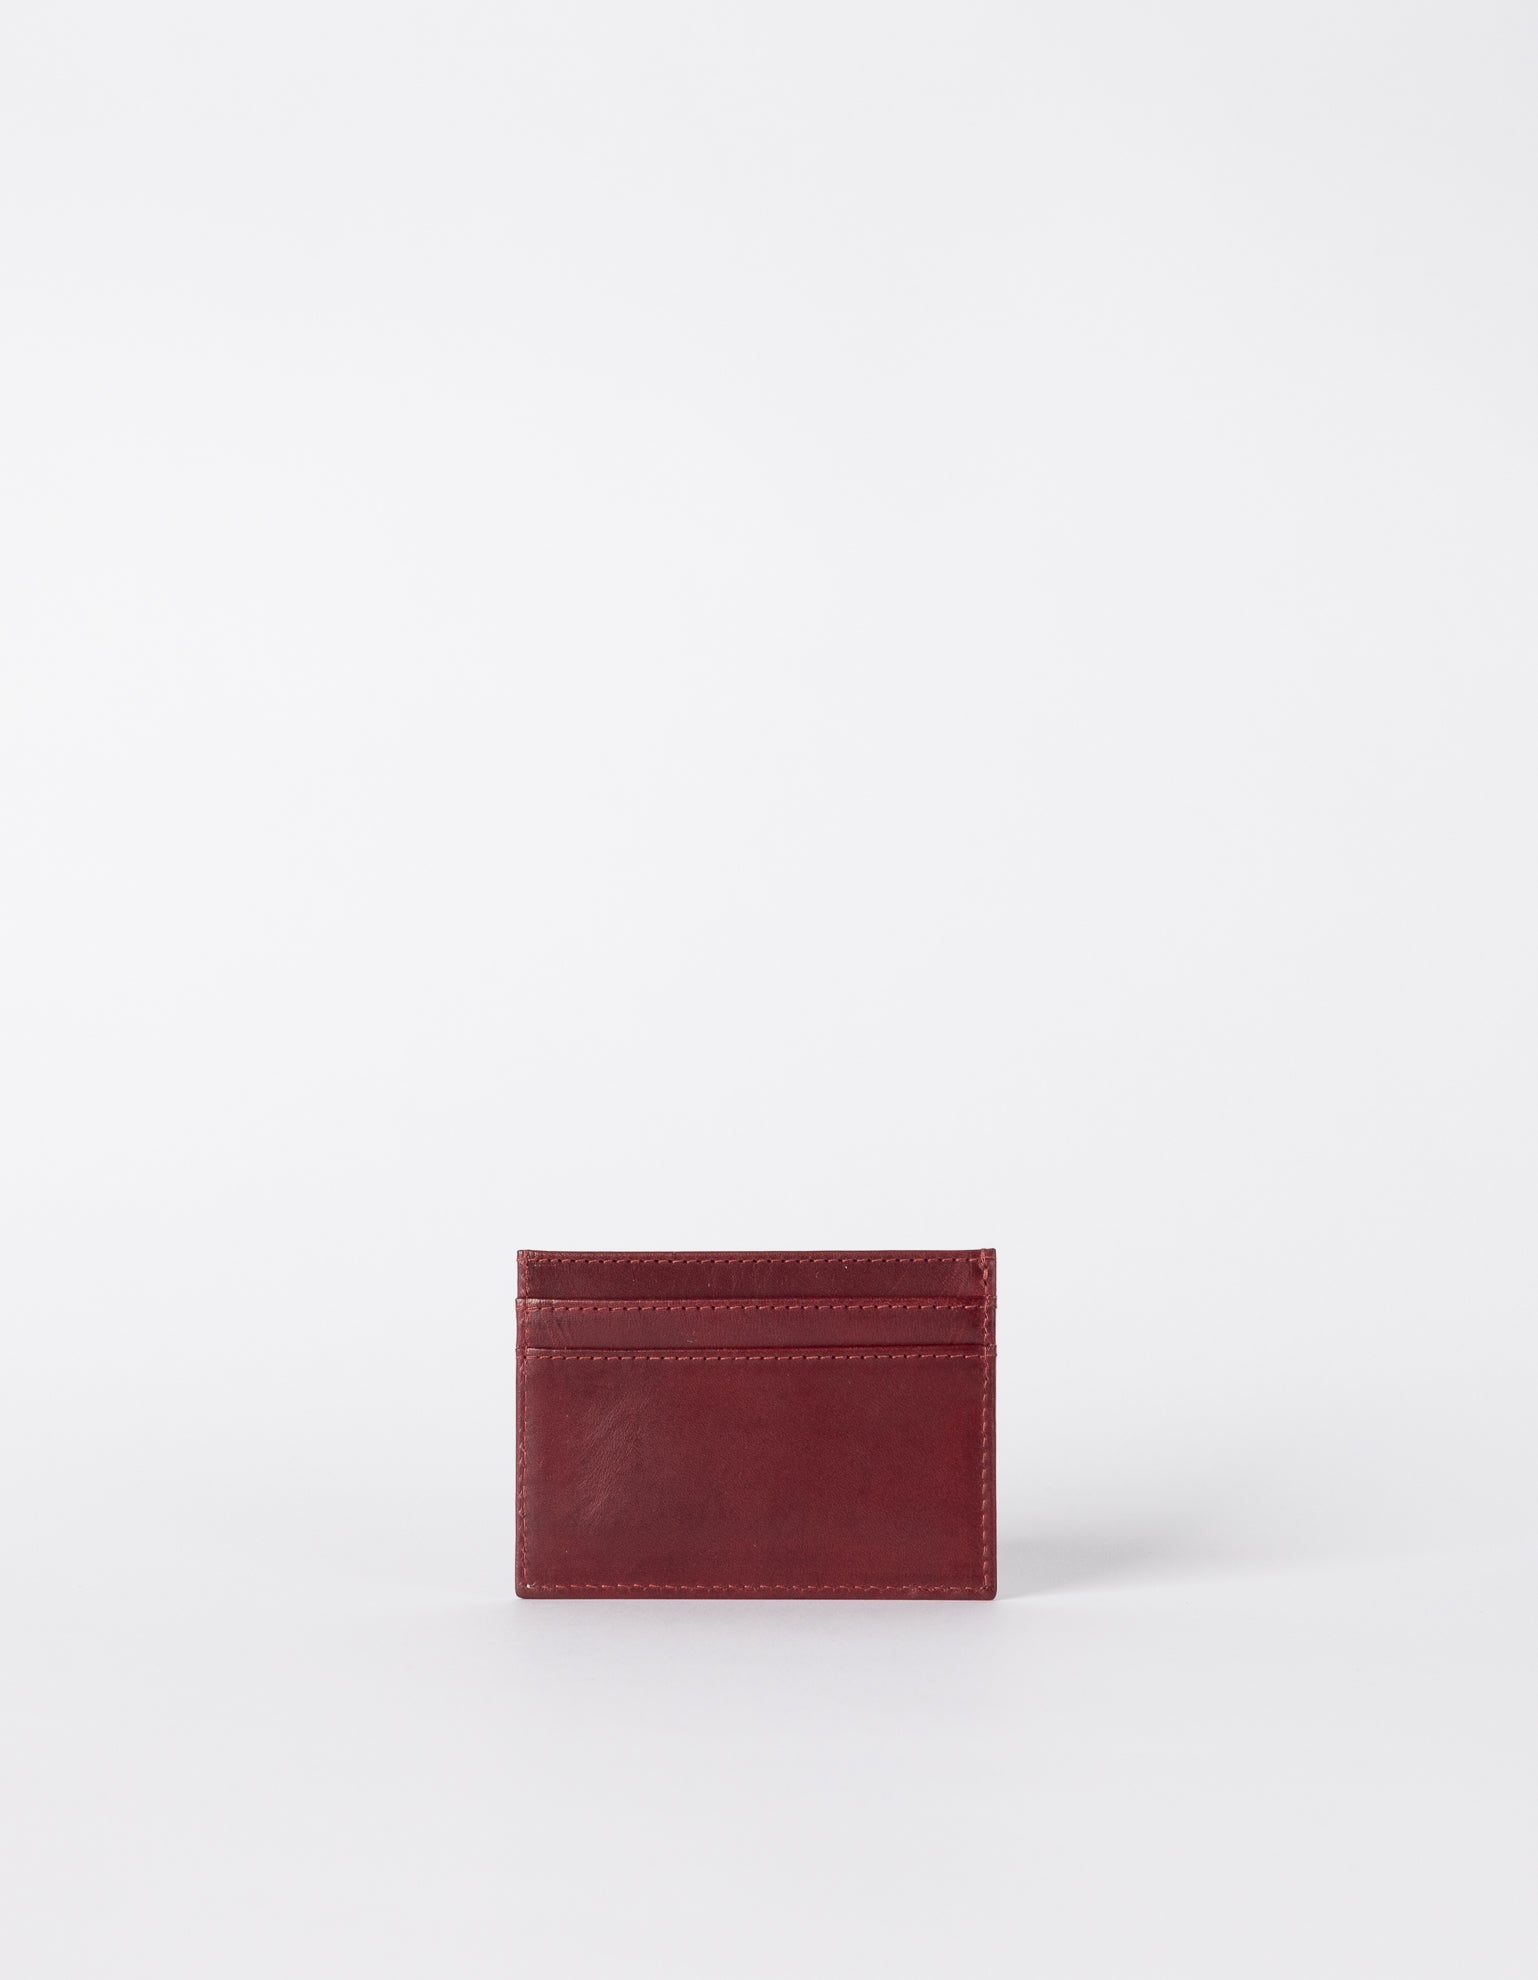 Marks Cardcase Ruby Classic Leather. Square leather wallet, card case for bank cards. Back product image.